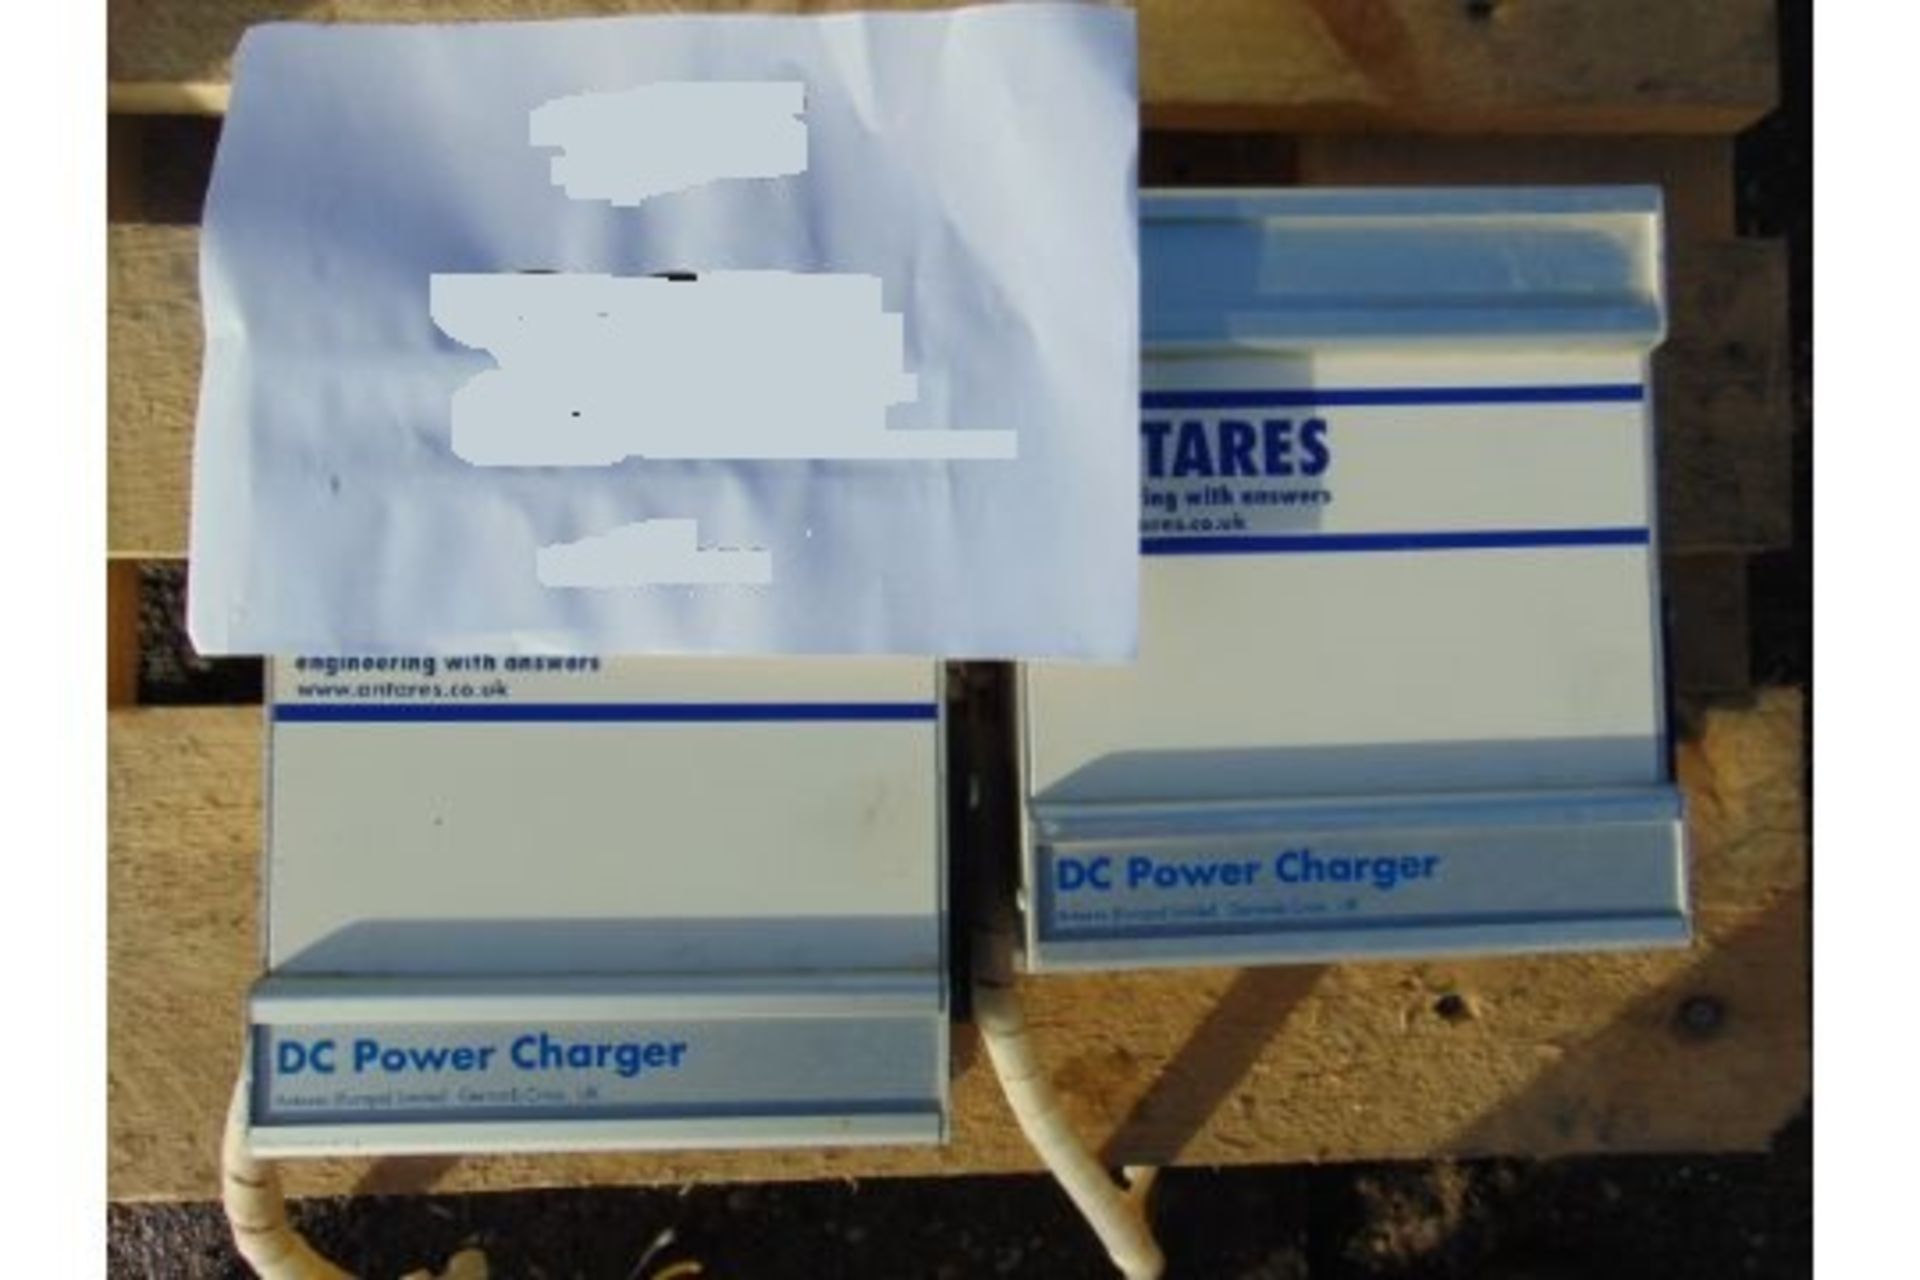 2X ANTARES DC POWER CHARGERS 24 VOLT - Image 2 of 4